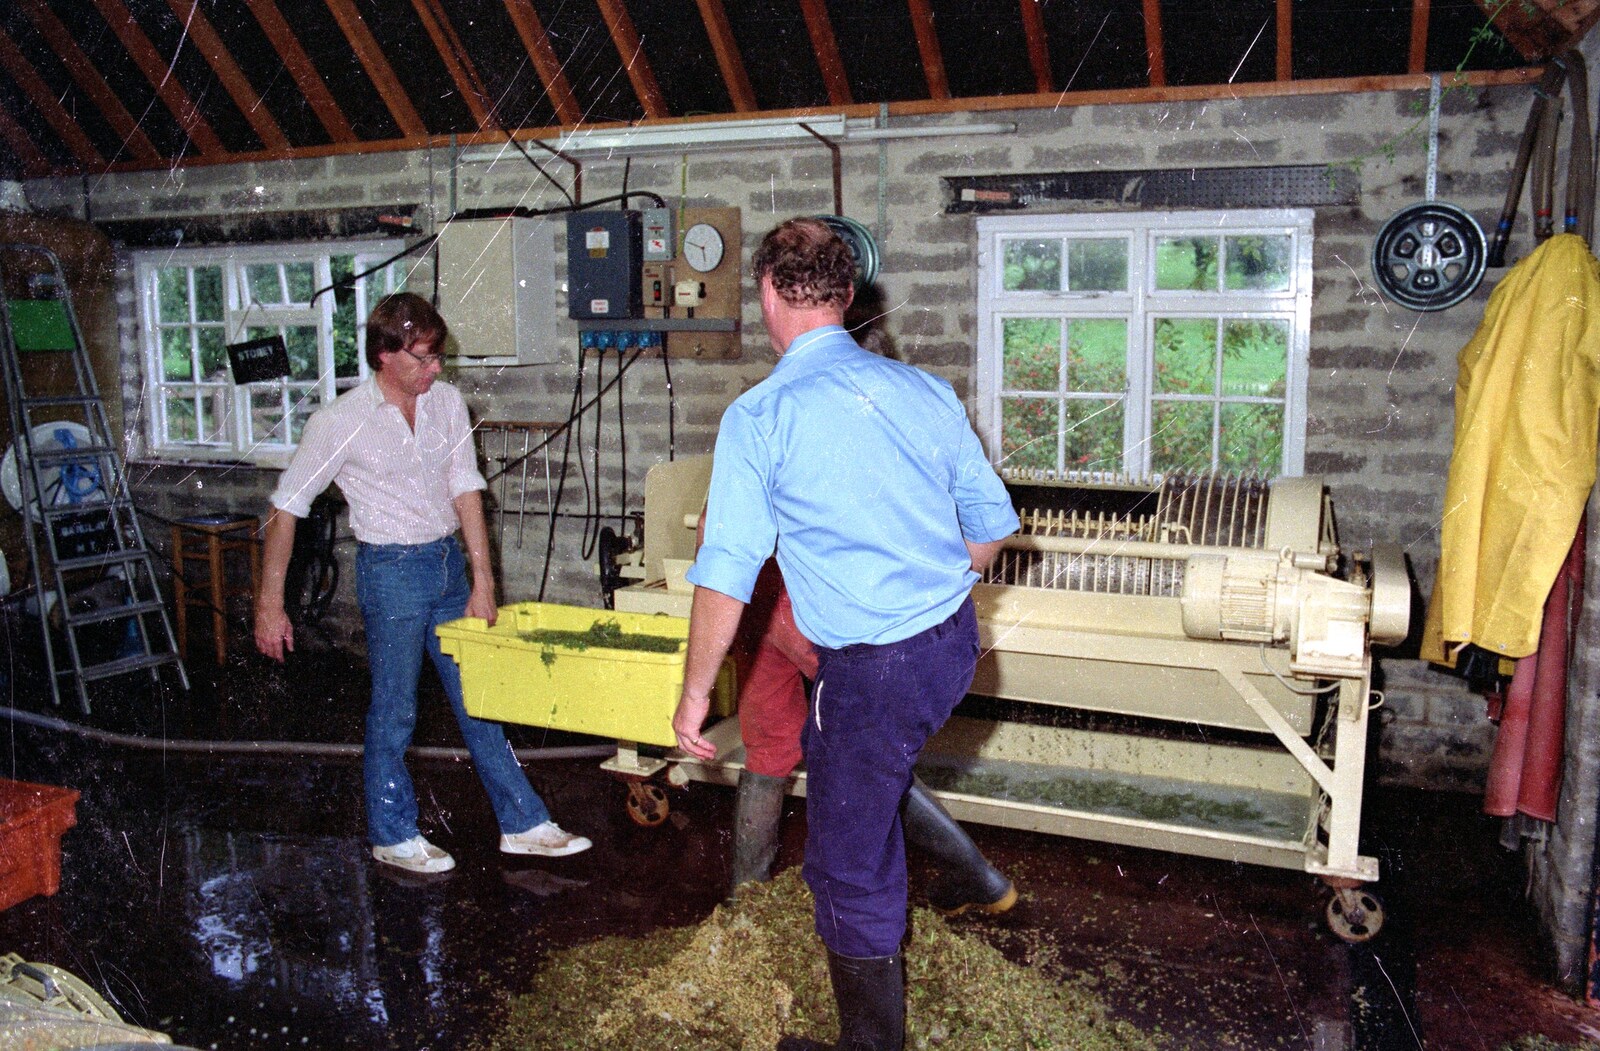 A pile of spent grapes on the floor from Harrow Vineyard Harvest and Wootton Winery, Dorset and Somerset - 5th September 1989